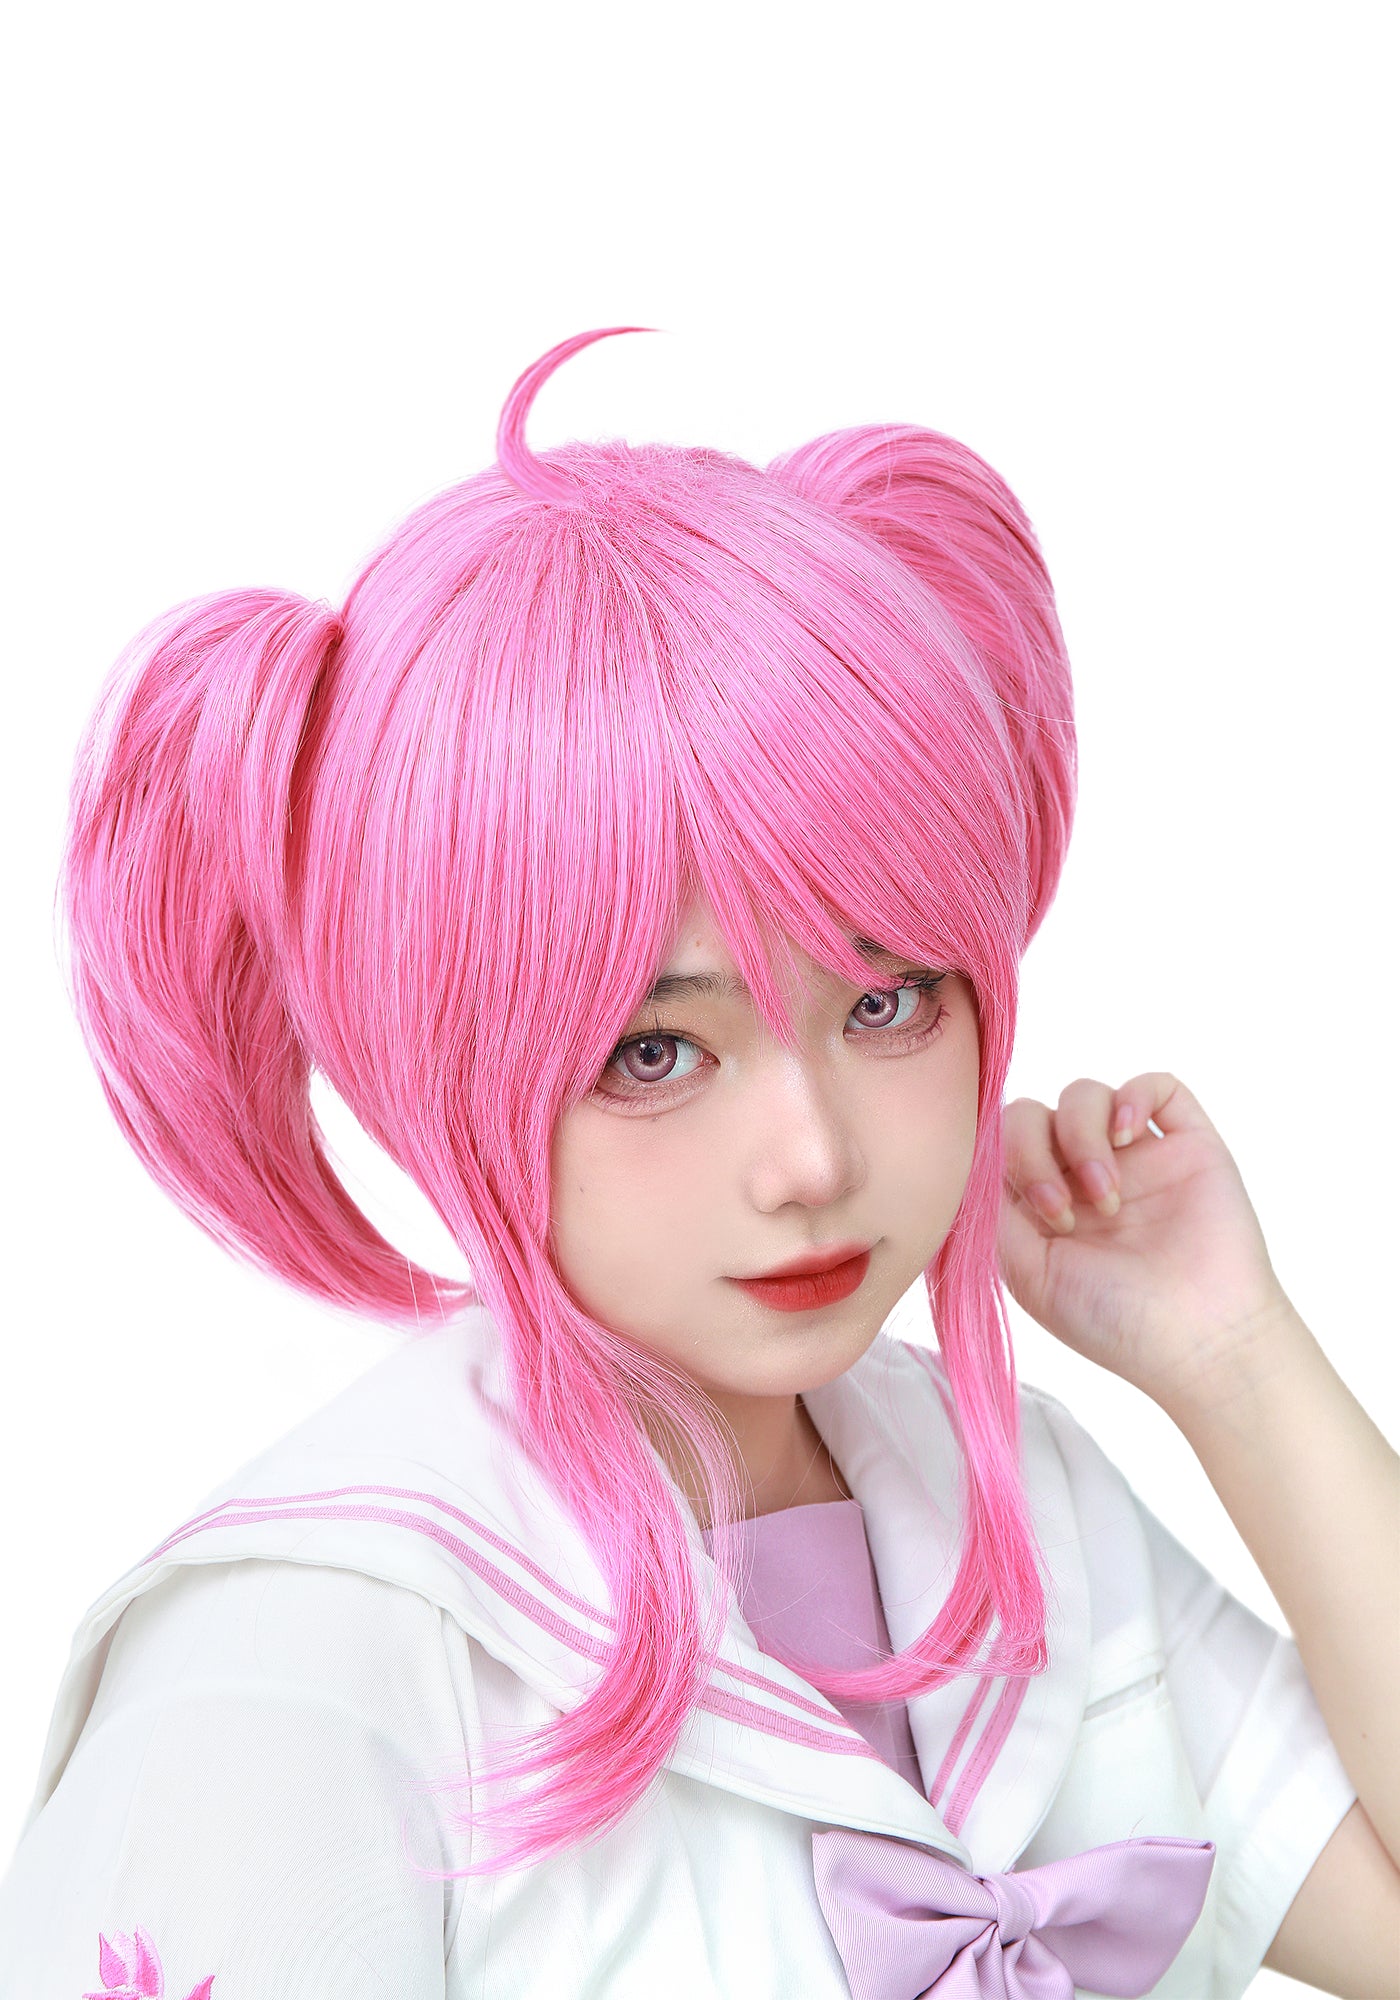 Luminosity Lady Star Guardian Lux Cosplay Wig with Ponytails Pink Pink